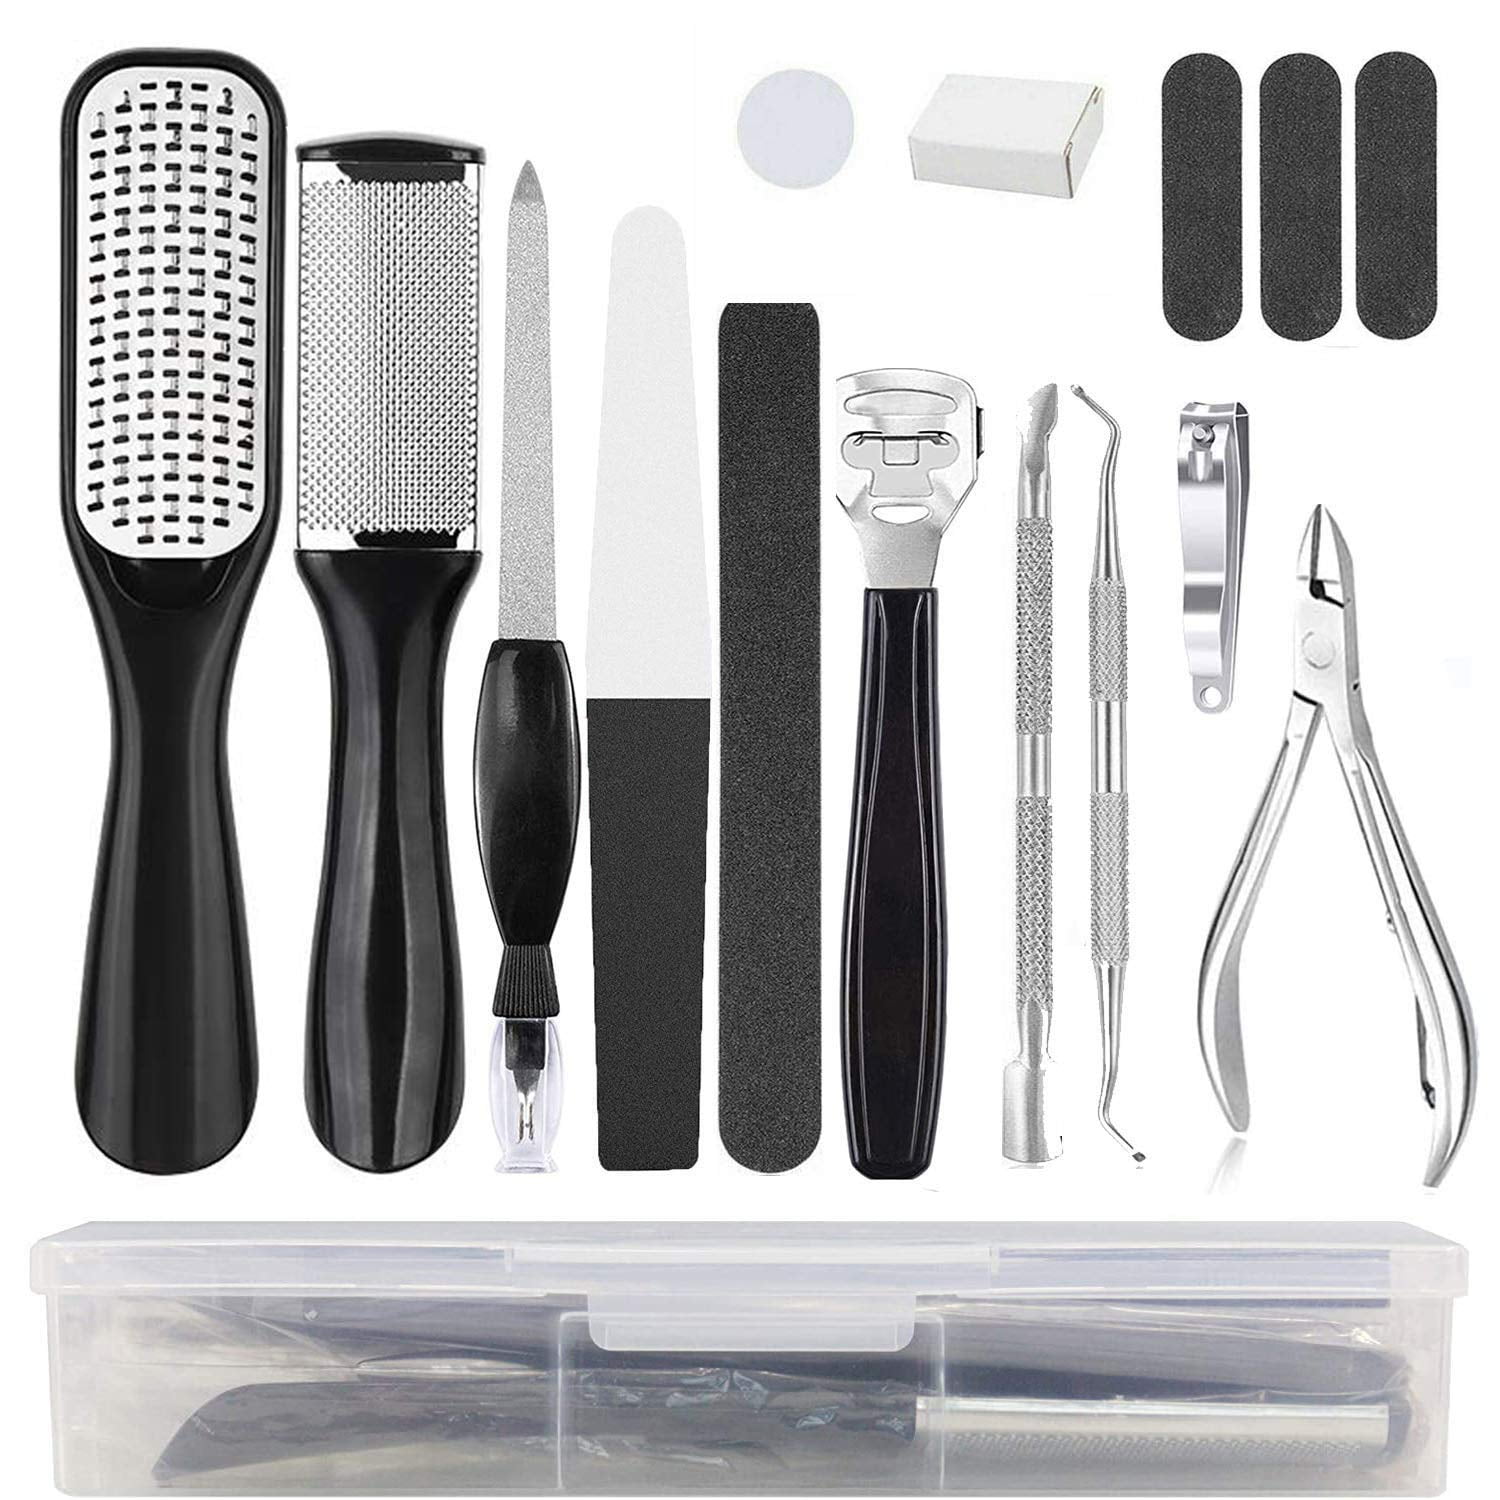 Pedi Pack, foot care kit (9 in 1 Professional Pedicure Kit, Foot Care  Pedicure Tools Set Stainless Steel Foot File Exfoliation Foot Dead Skin  Remover